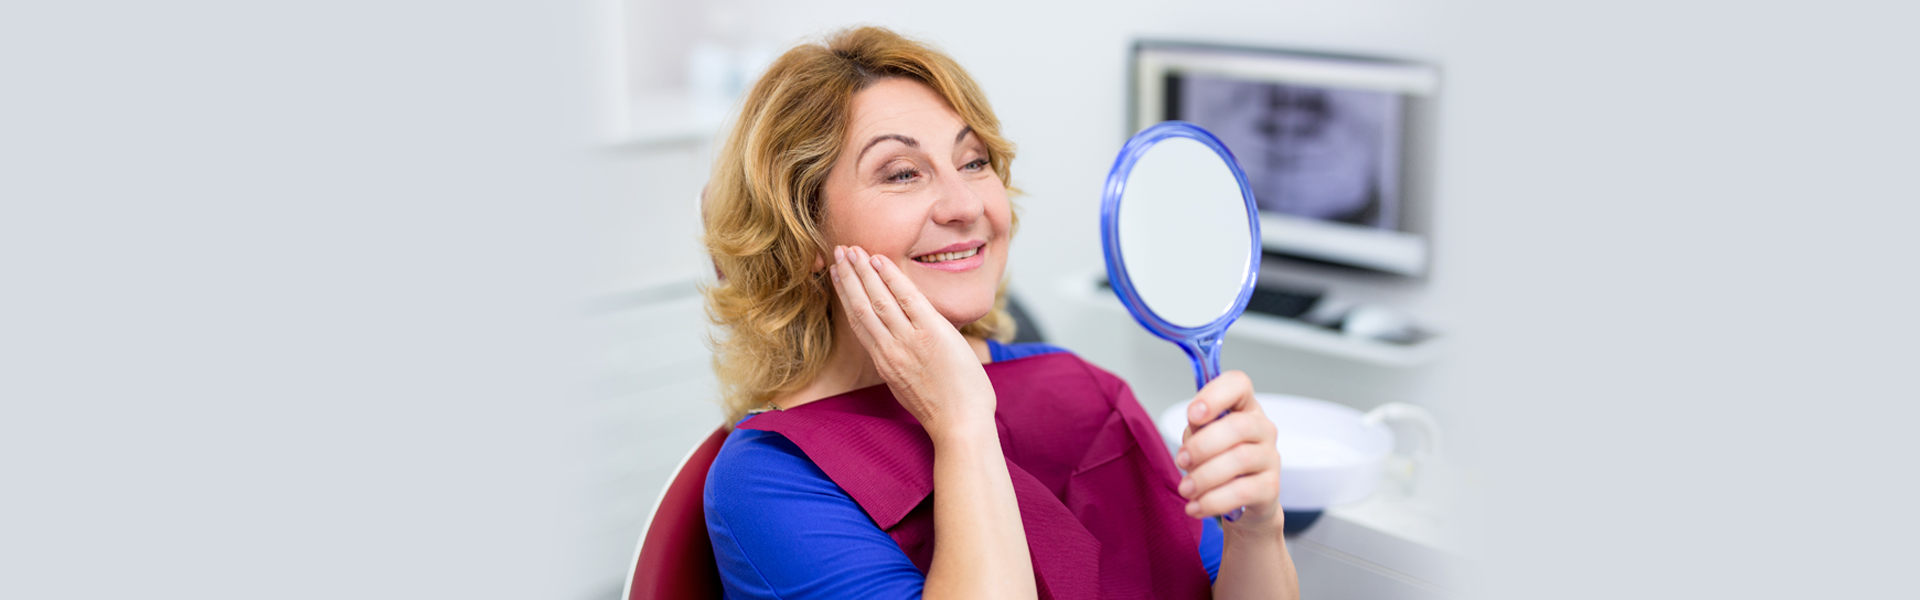 Dental Implants: All Information You Want on These Replacements for Missing Teeth